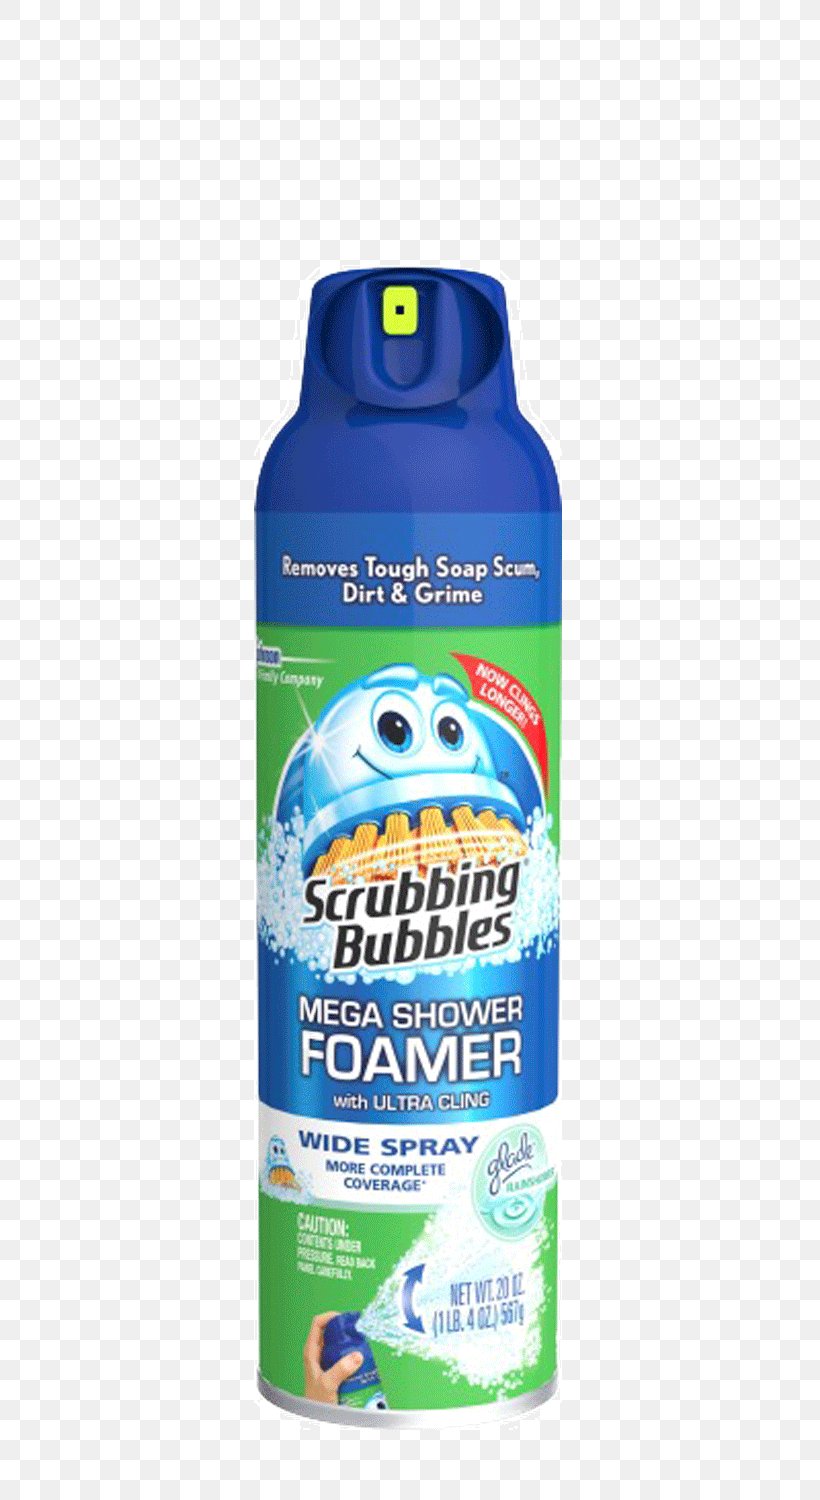 Scrubbing Bubbles Toilet Cleaner Foam Shower Cleaning, PNG, 540x1500px, Scrubbing Bubbles, Bathroom, Bathtub, Cleaner, Cleaning Download Free